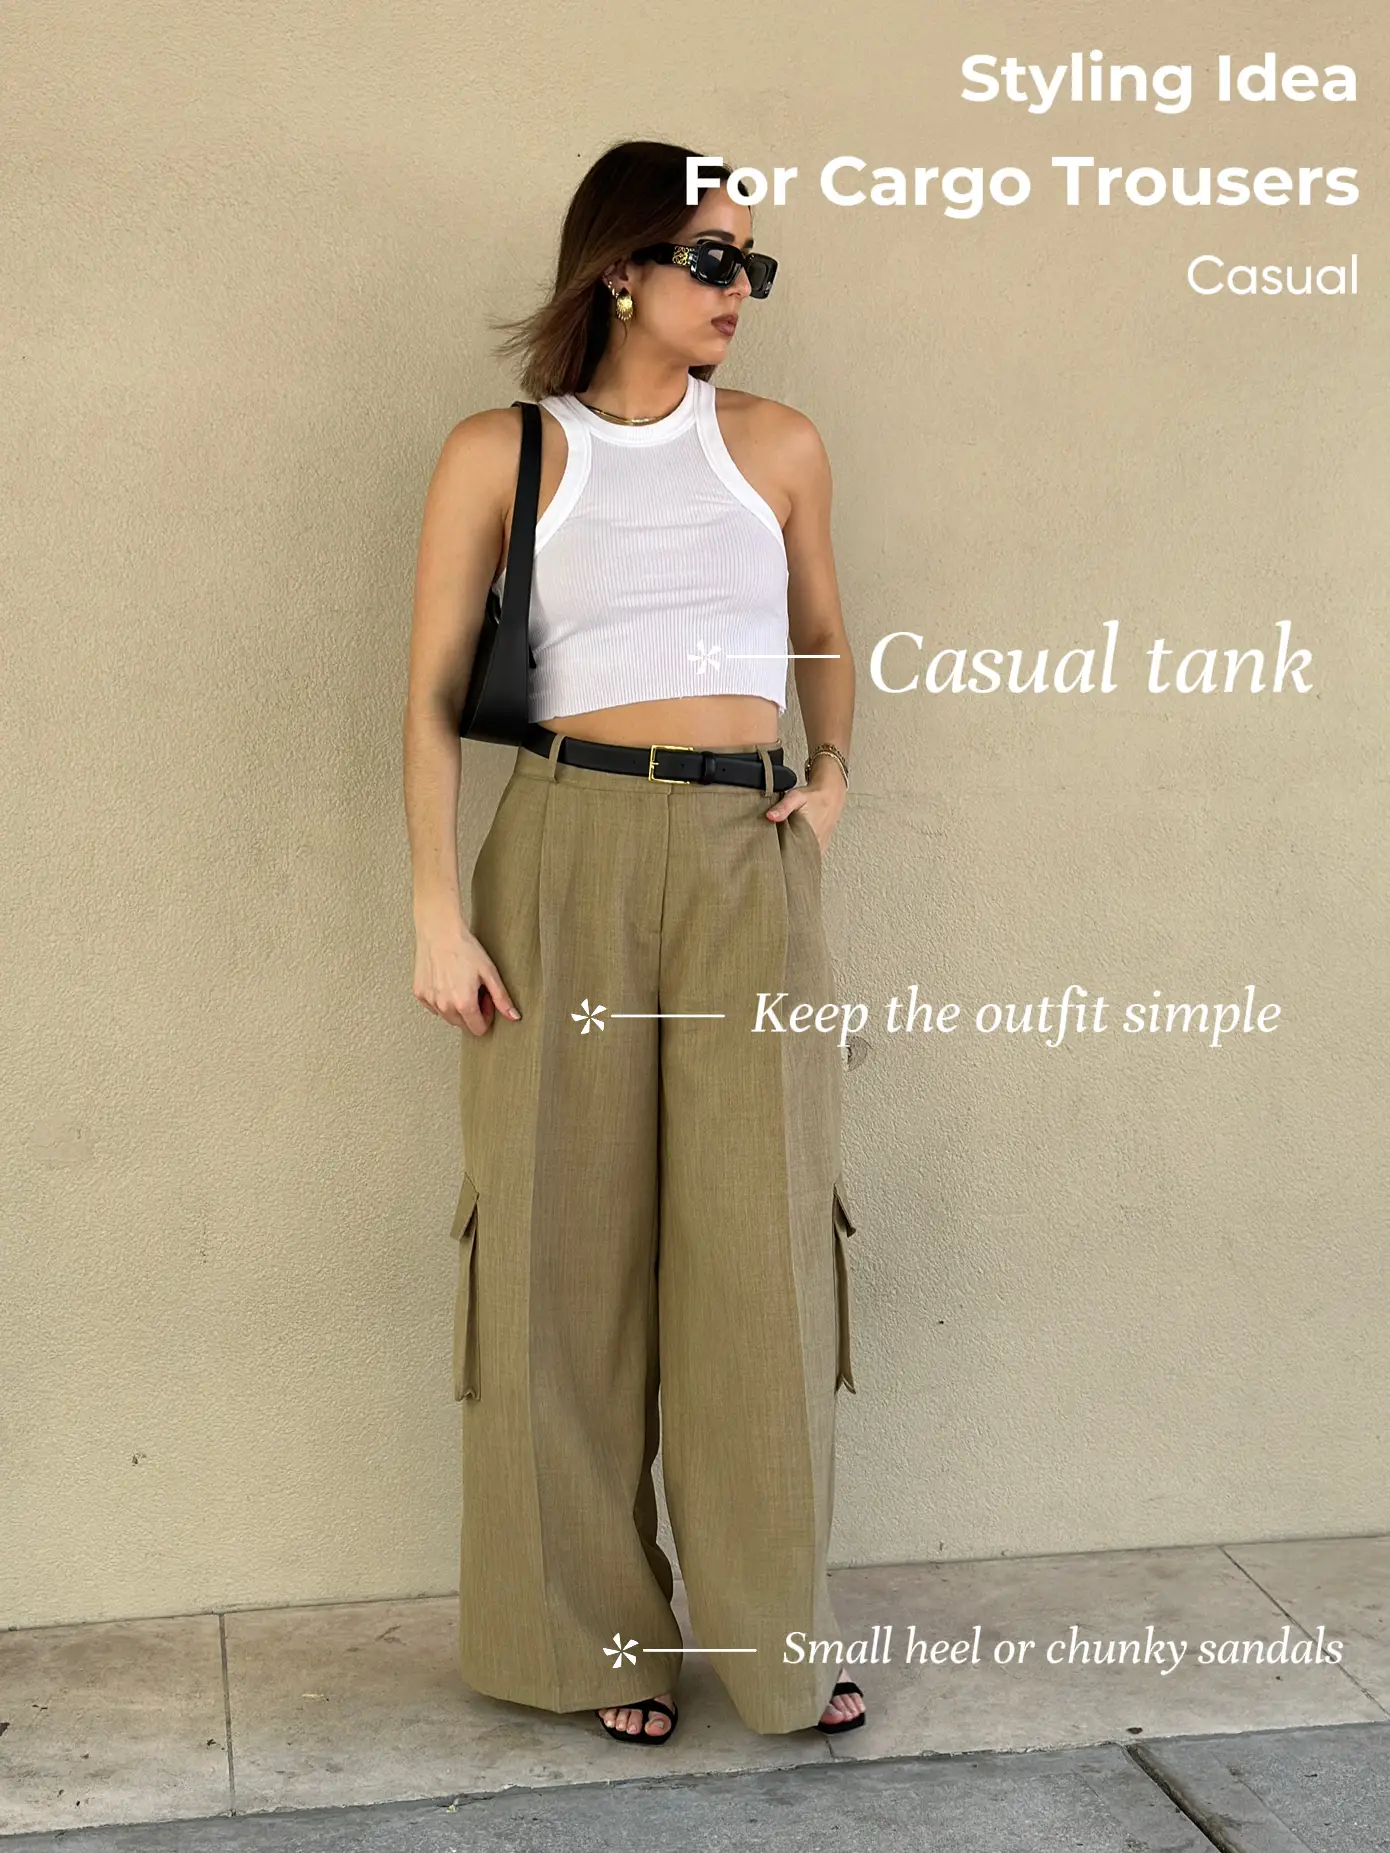 Do you need cargo pants outfit ideas? Here's 5 ways I'm styling my